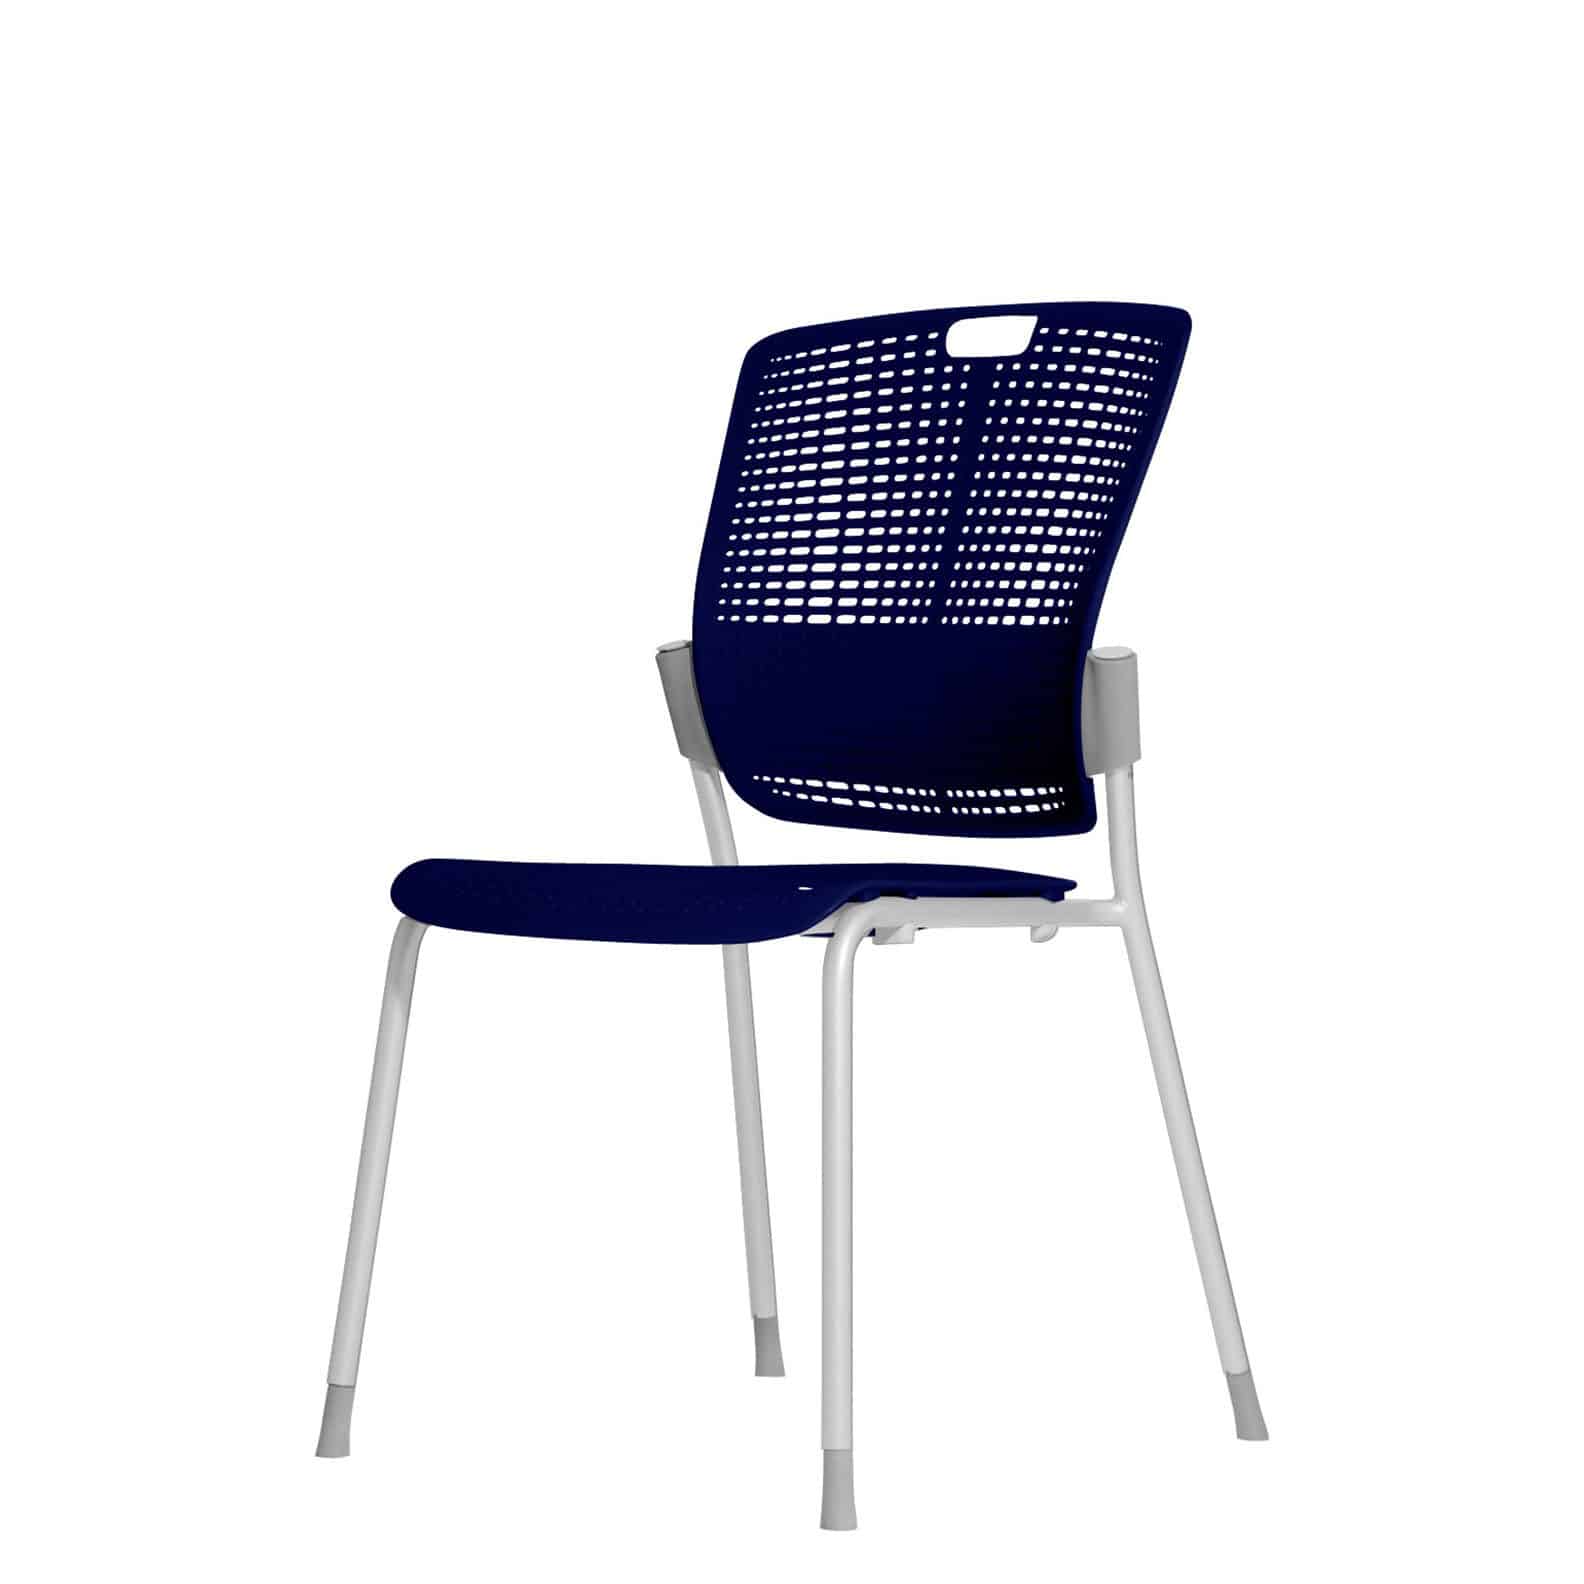 The Cinto chair is lightweight, comfortable and maneuverable, and perfect for open offices and team office environments.